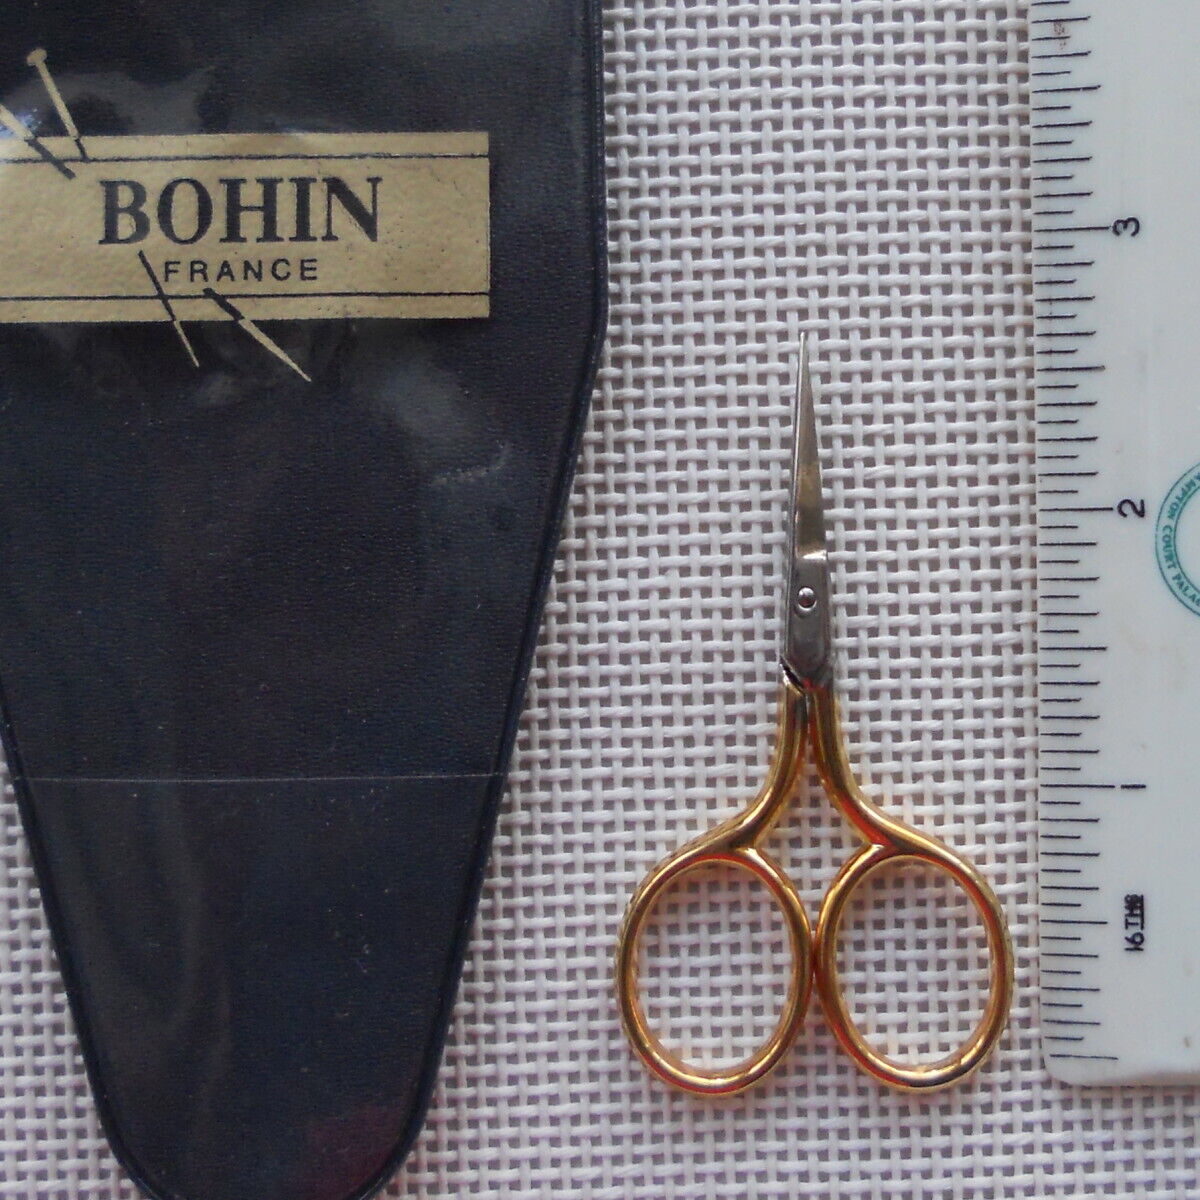 Bohin Small Embroidery Scissors With Gold Handles Made In France